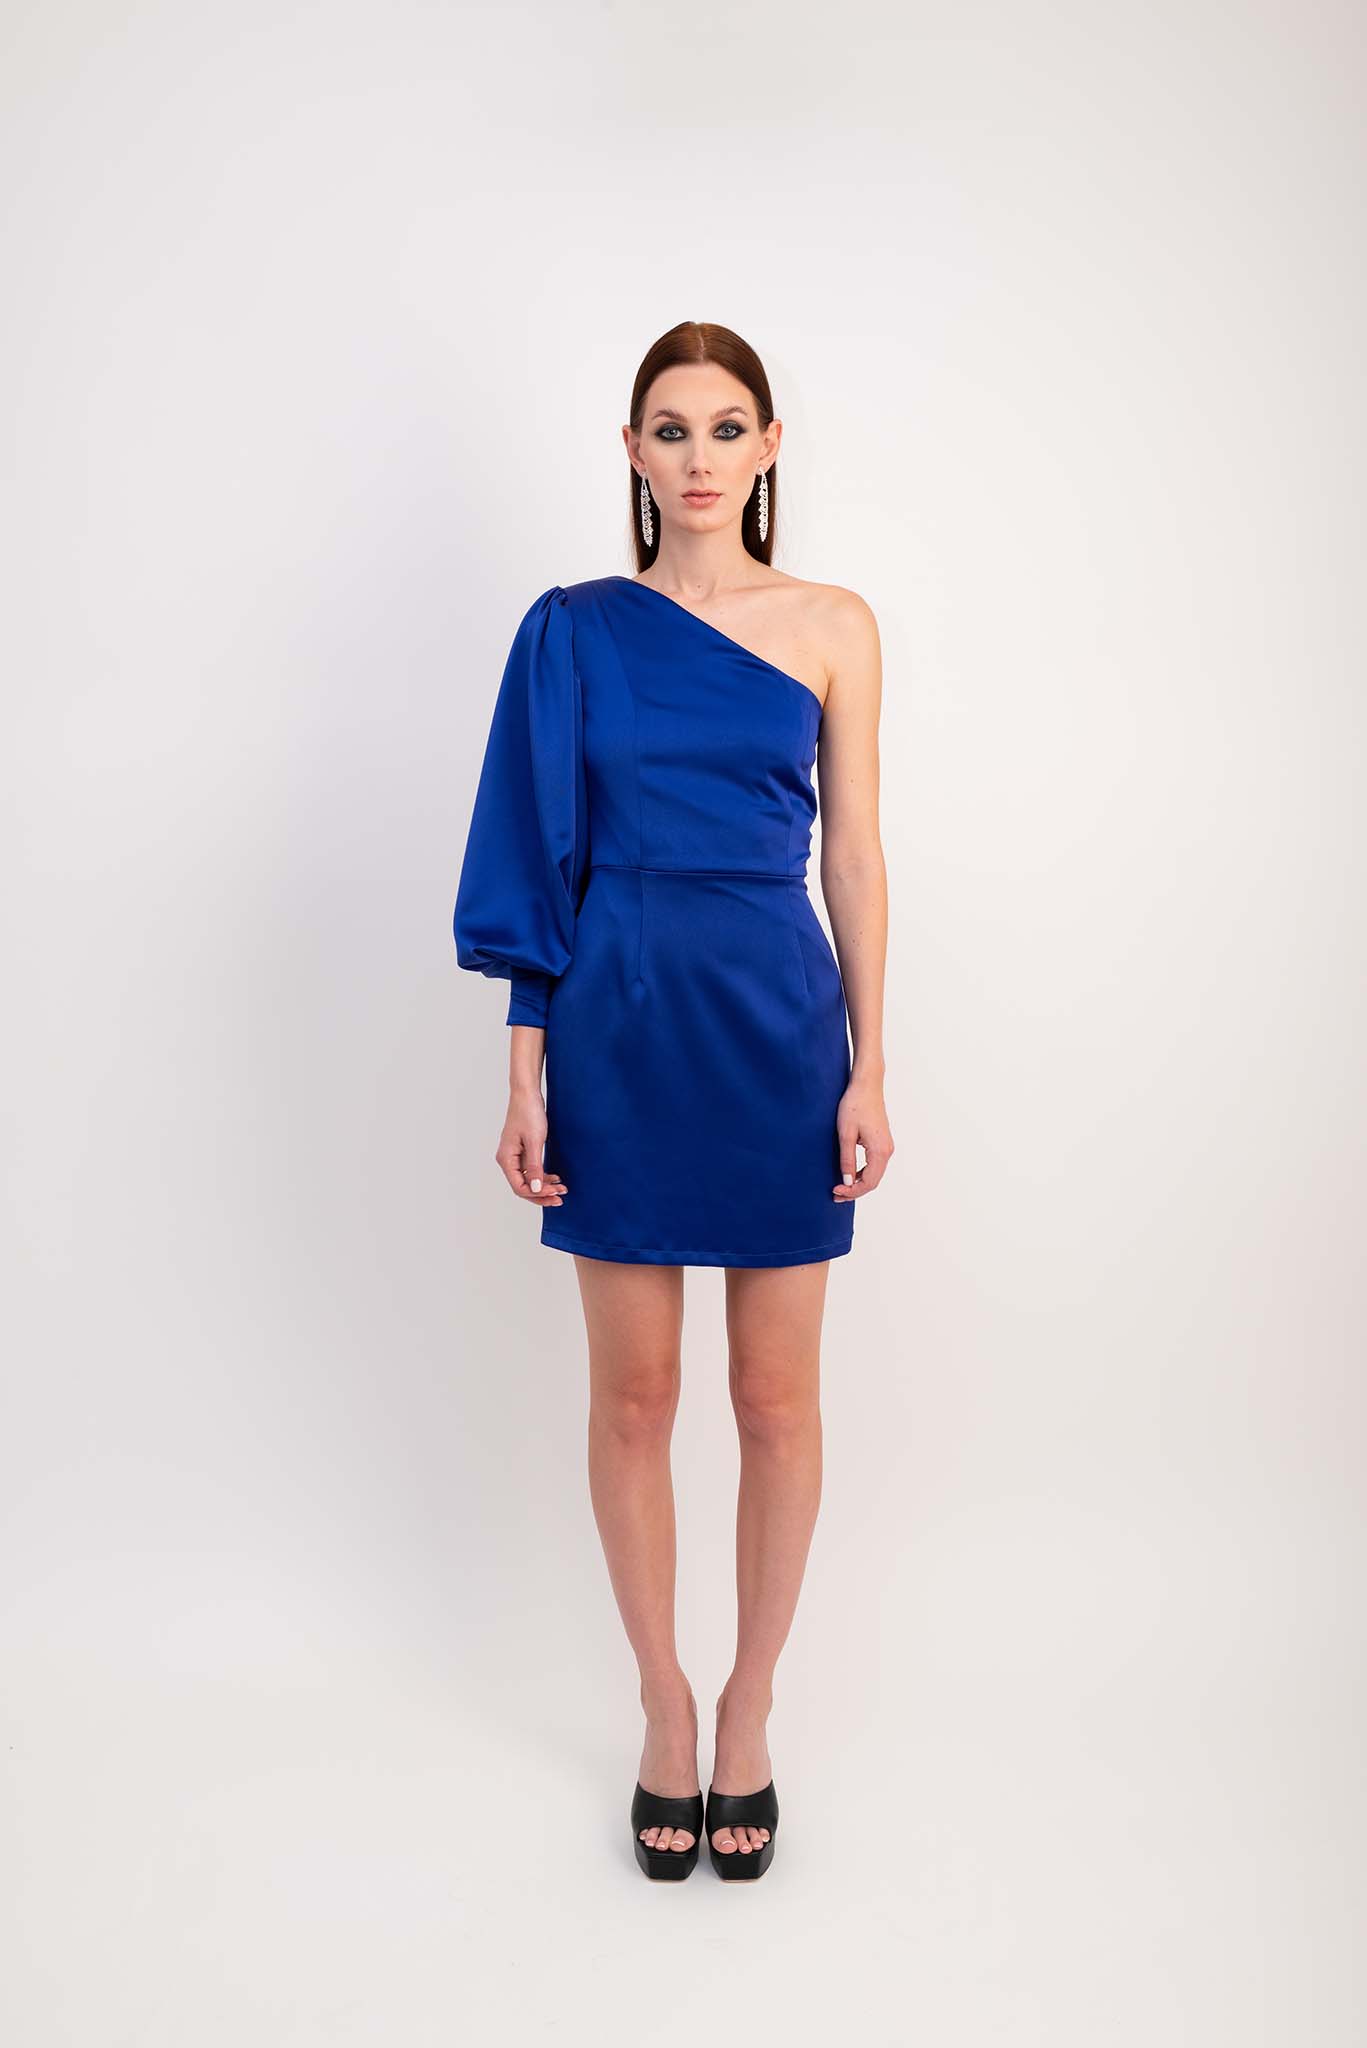 IRA by Irini Charalampous, @irathebrand online shop fashionable ready-to-wear womenswear brand satin dress AMARIS color blue ink high heels Cyprus Greece